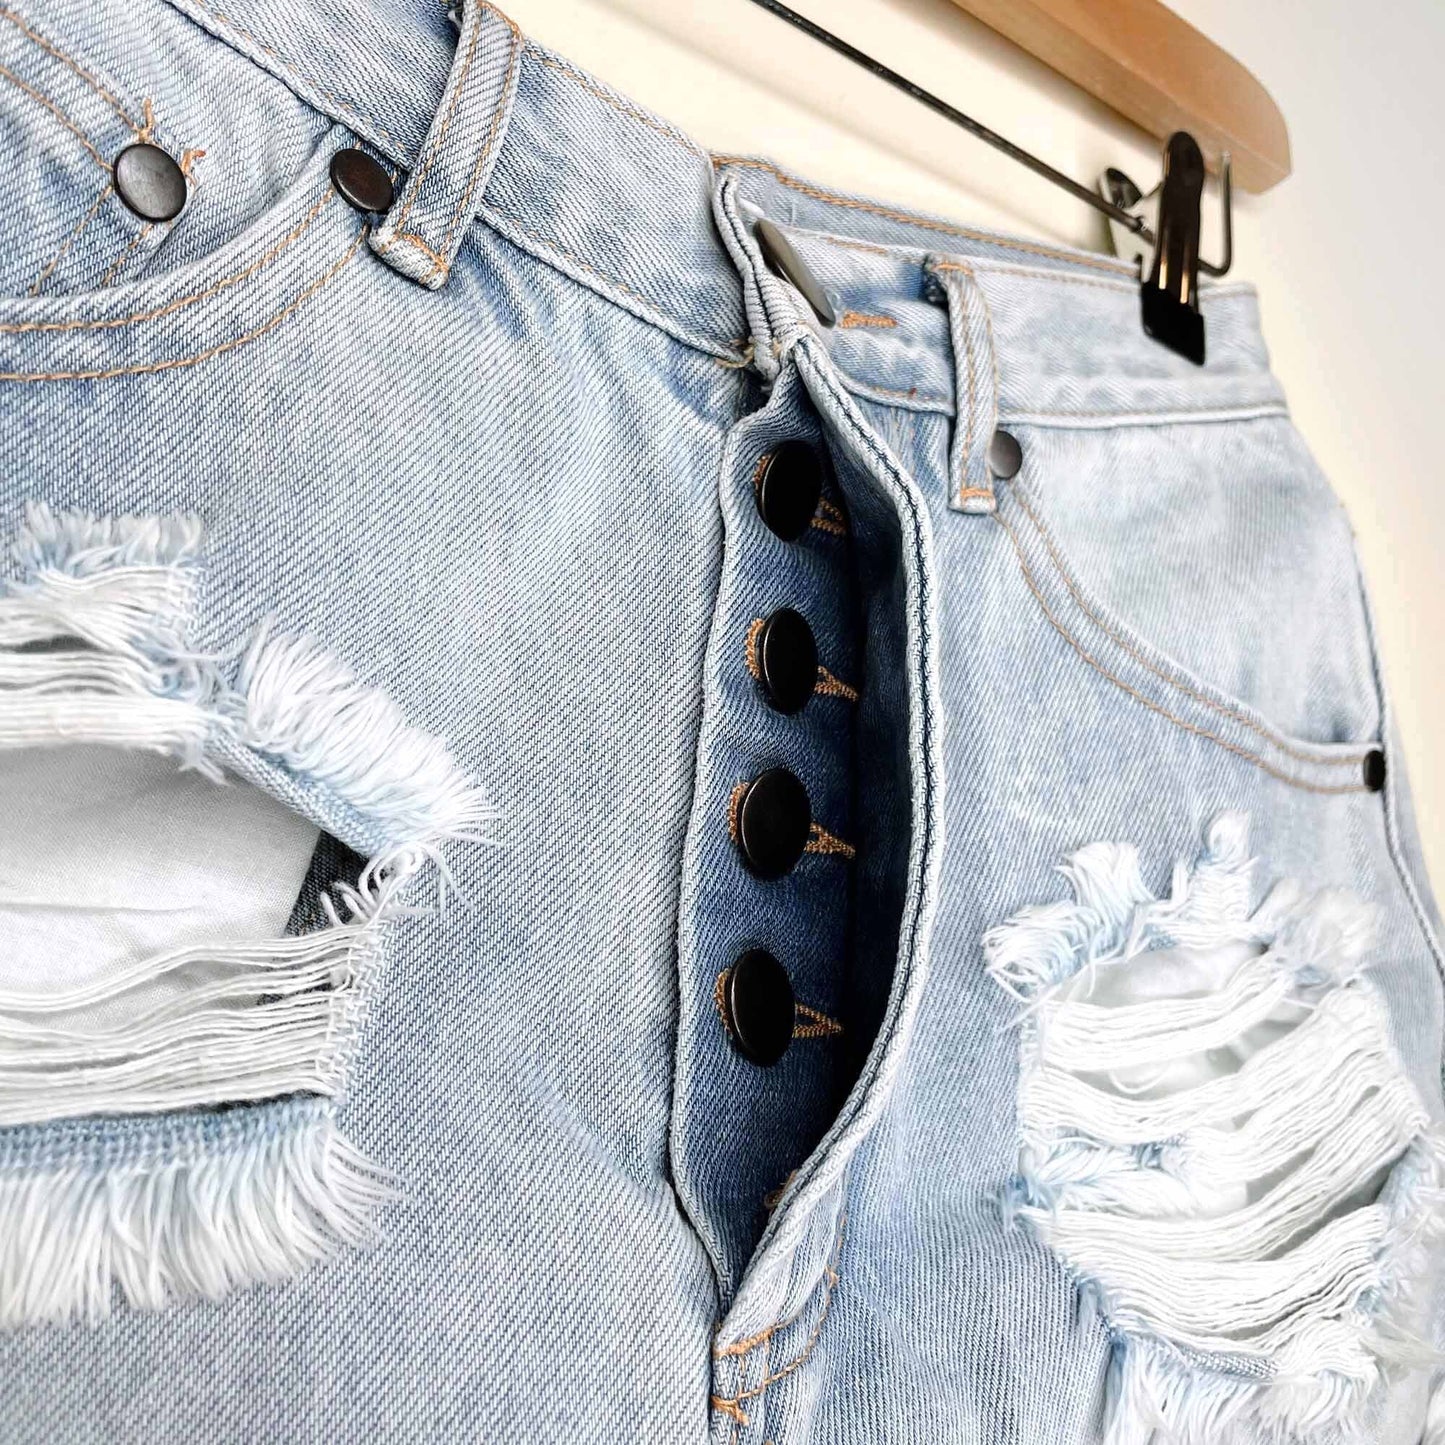 TOBI high rise button fly distressed jean shorts - size 27